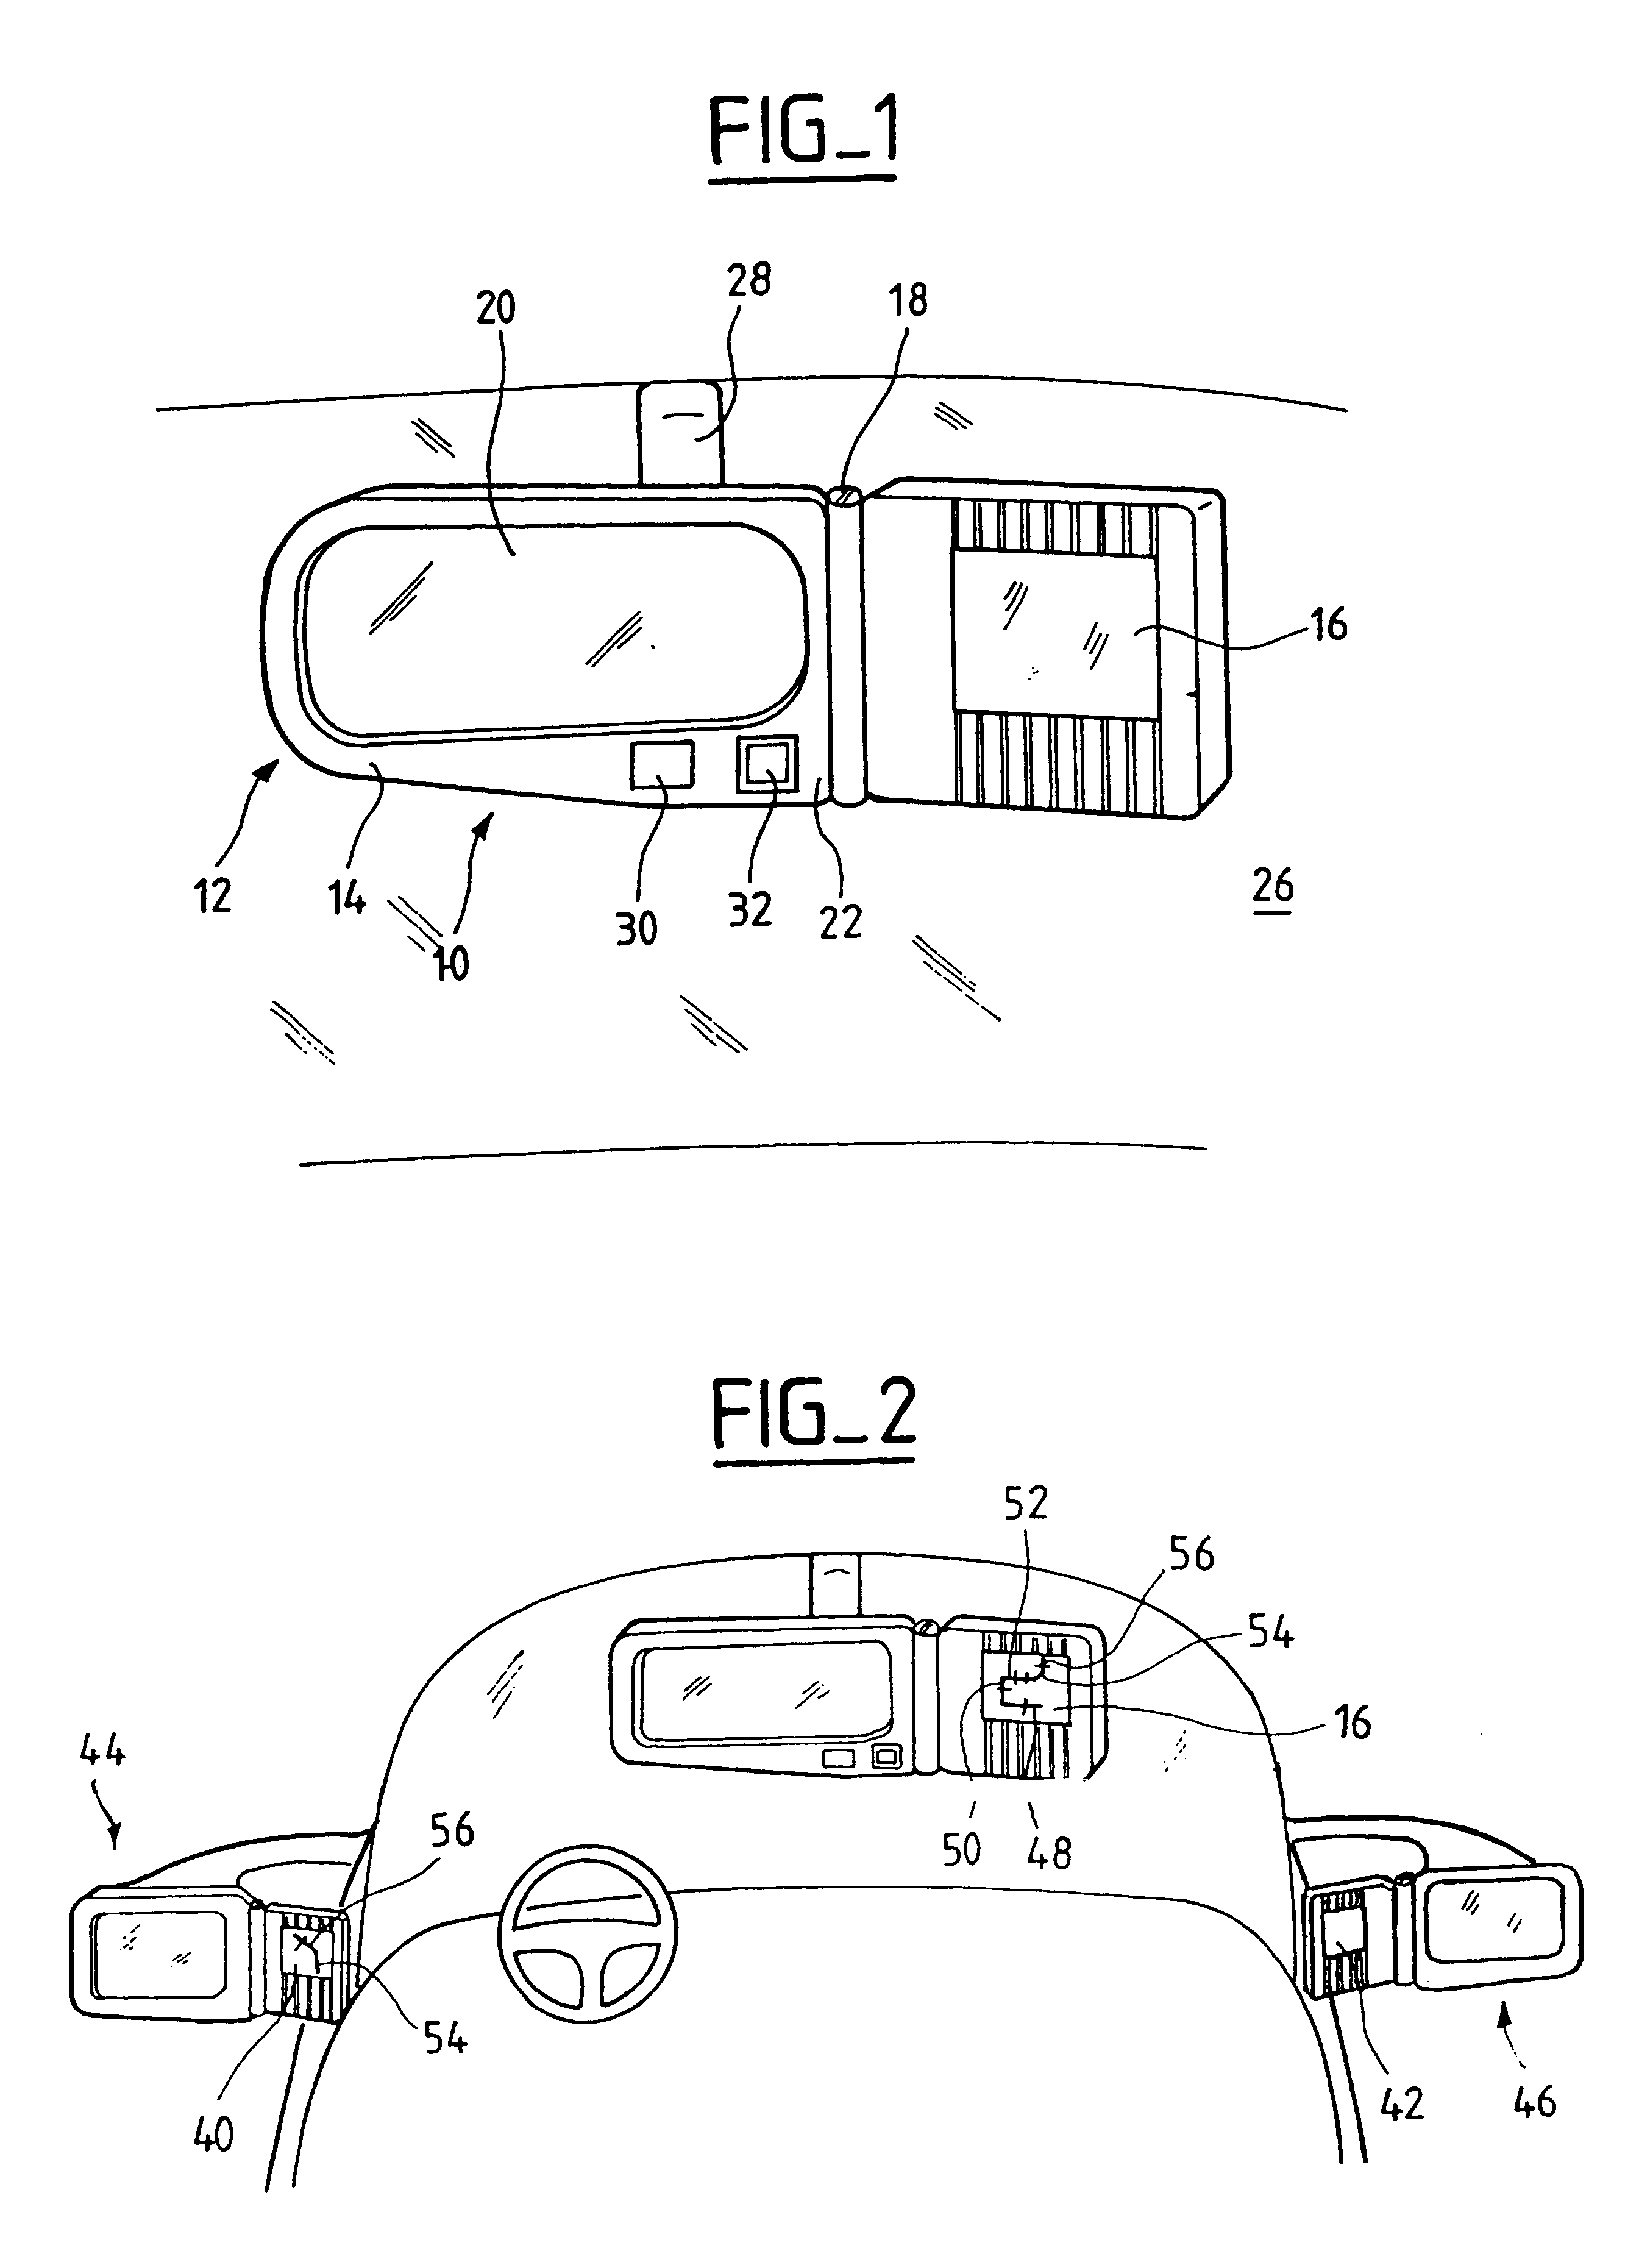 Motor vehicle accessory comprising a data display screen for the driver